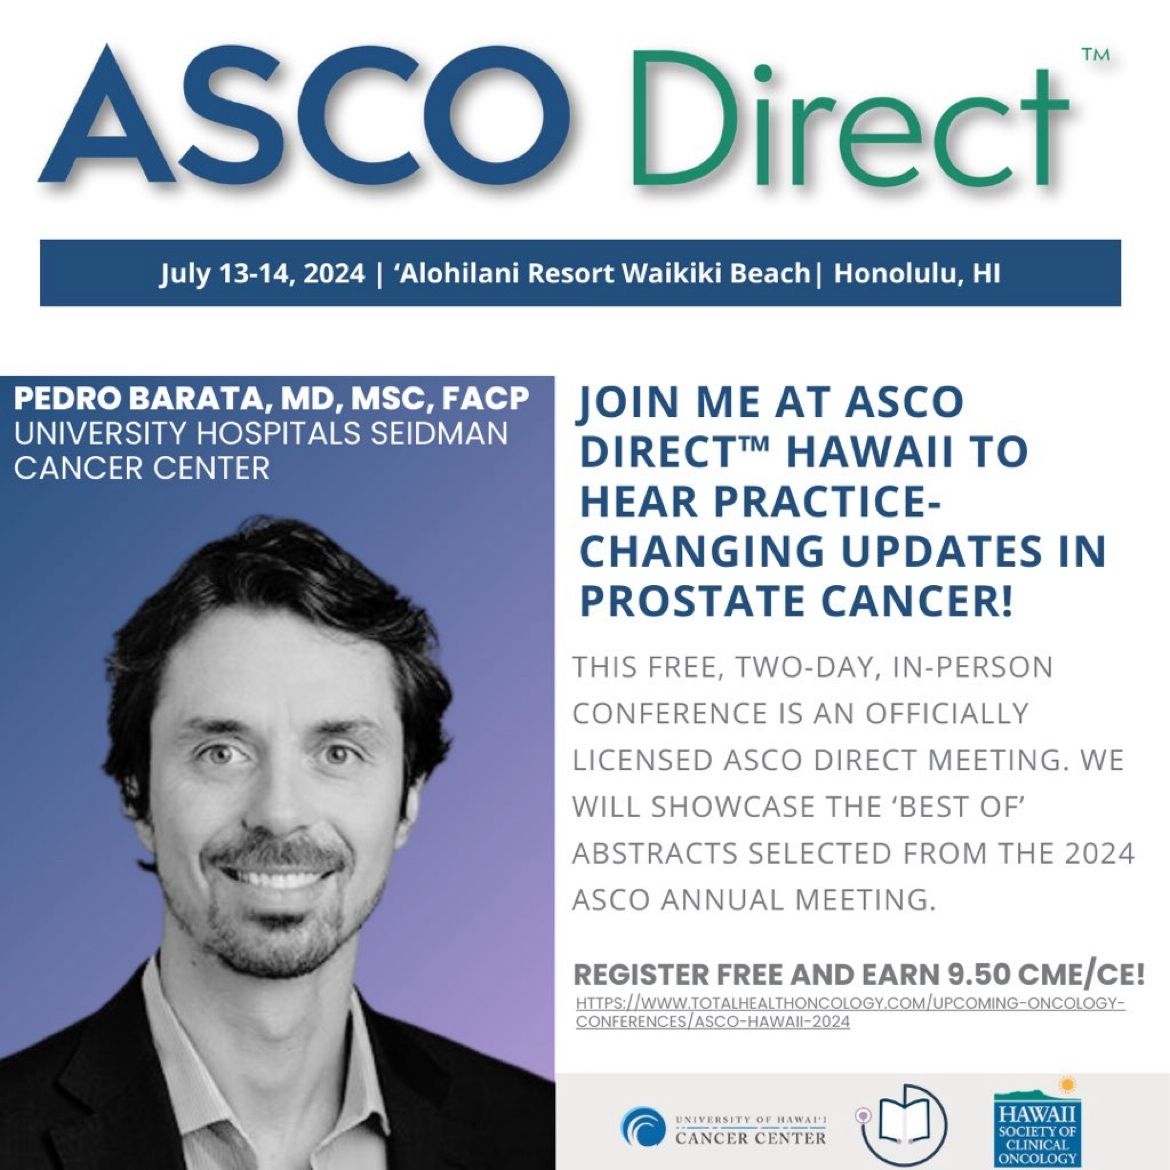 Pedro Barata: Excited to join as a speaker at the upcoming 2024 ASCO Direct Hawaii Conference!